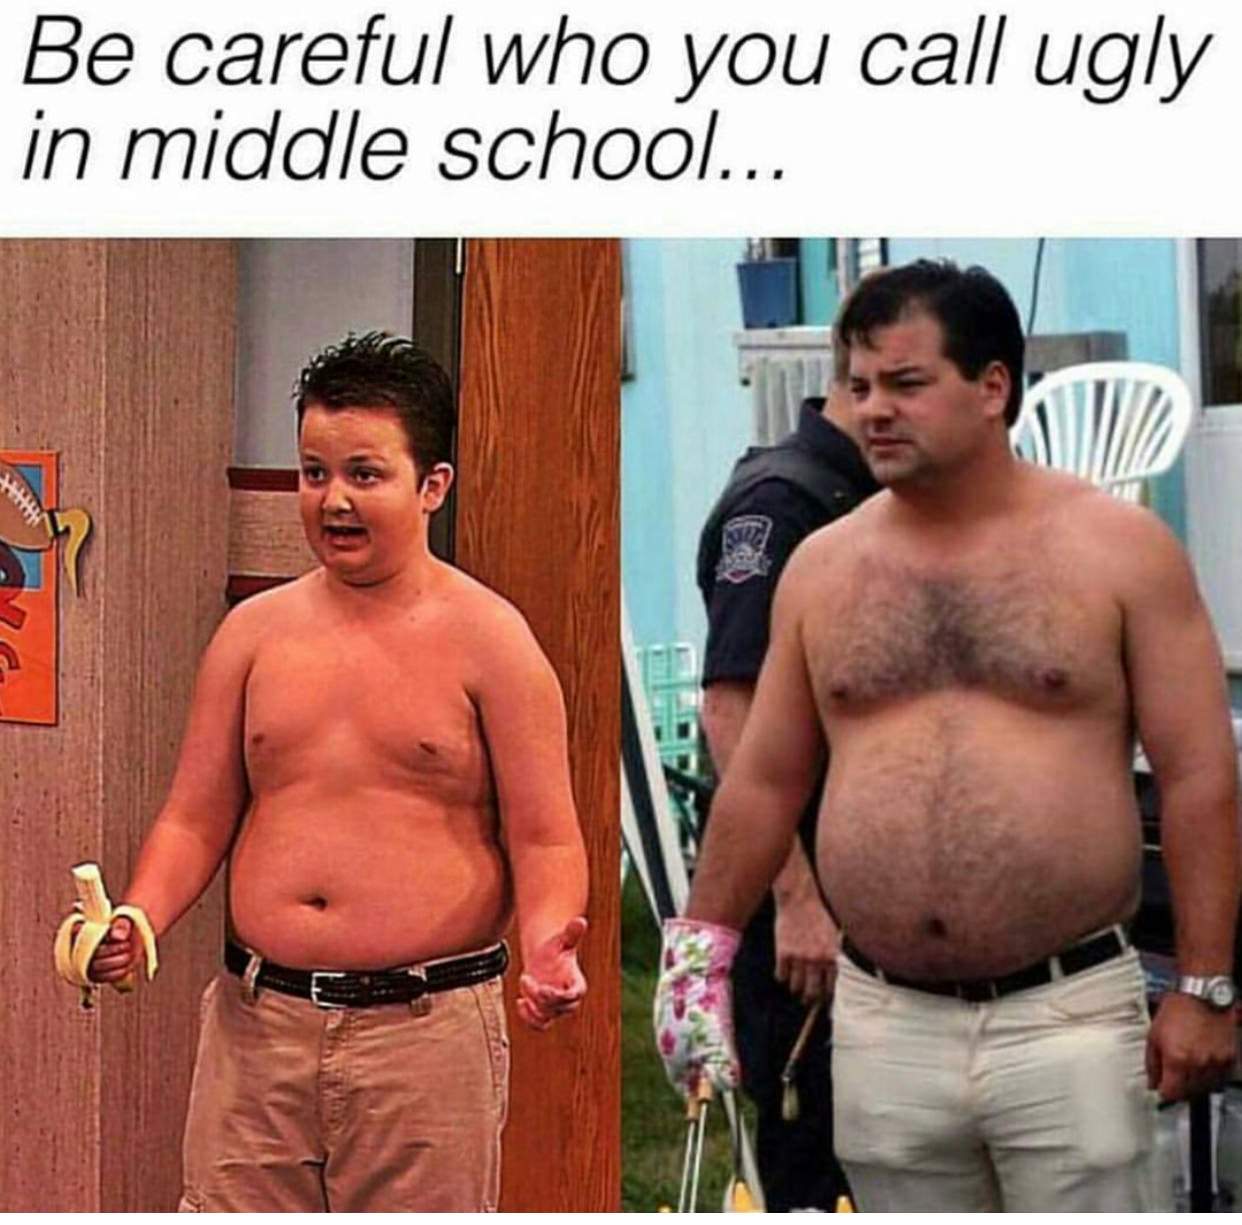 gibby memes - Be careful who you call ugly in middle school...